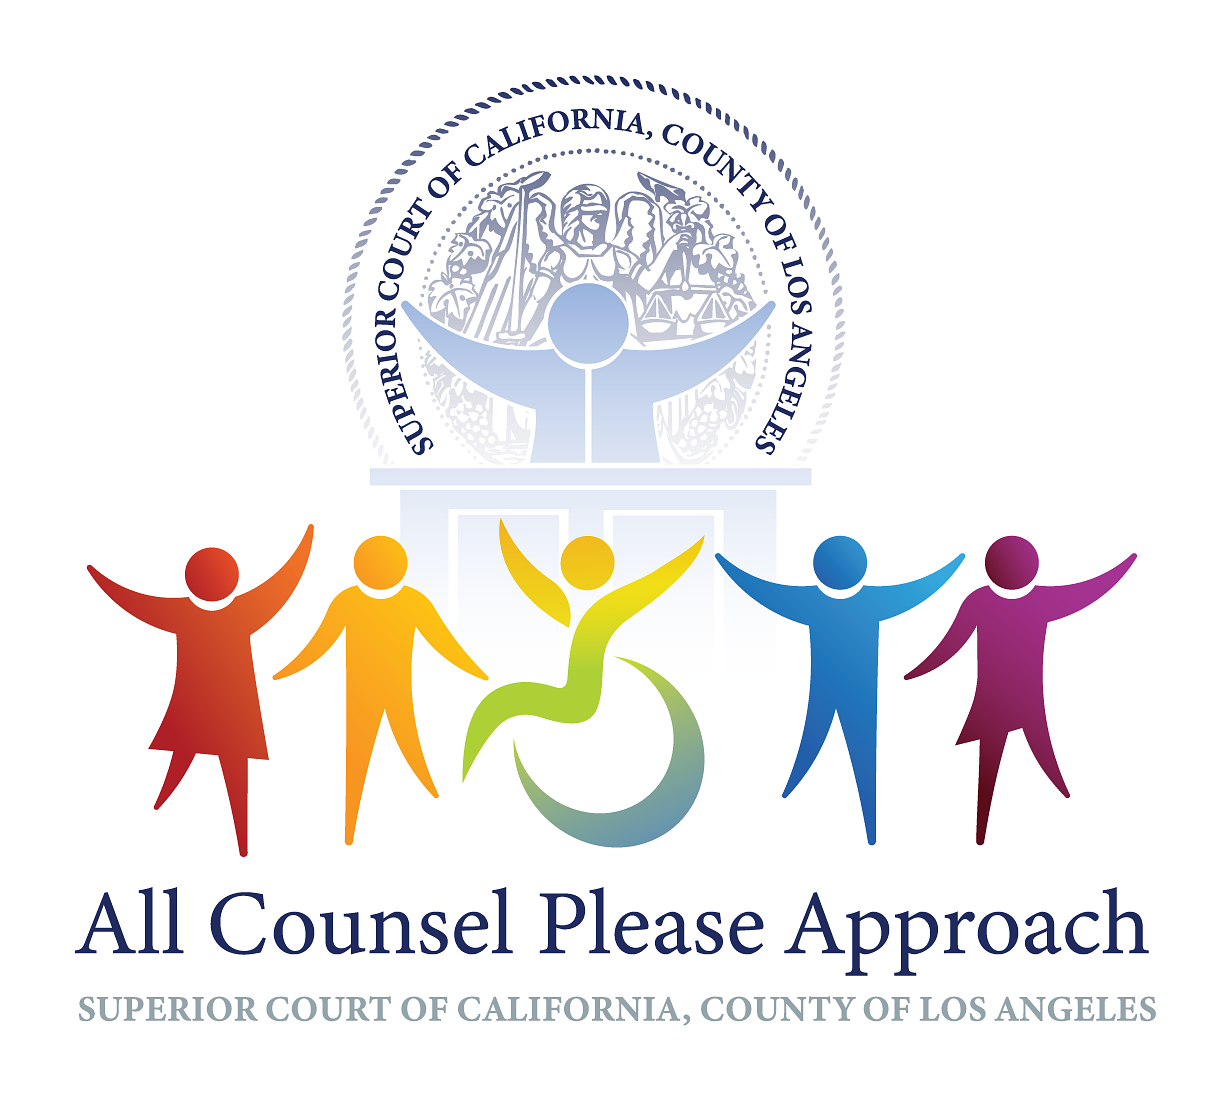 Diversity Initiative - Superior Court of California, County of Los Angeles